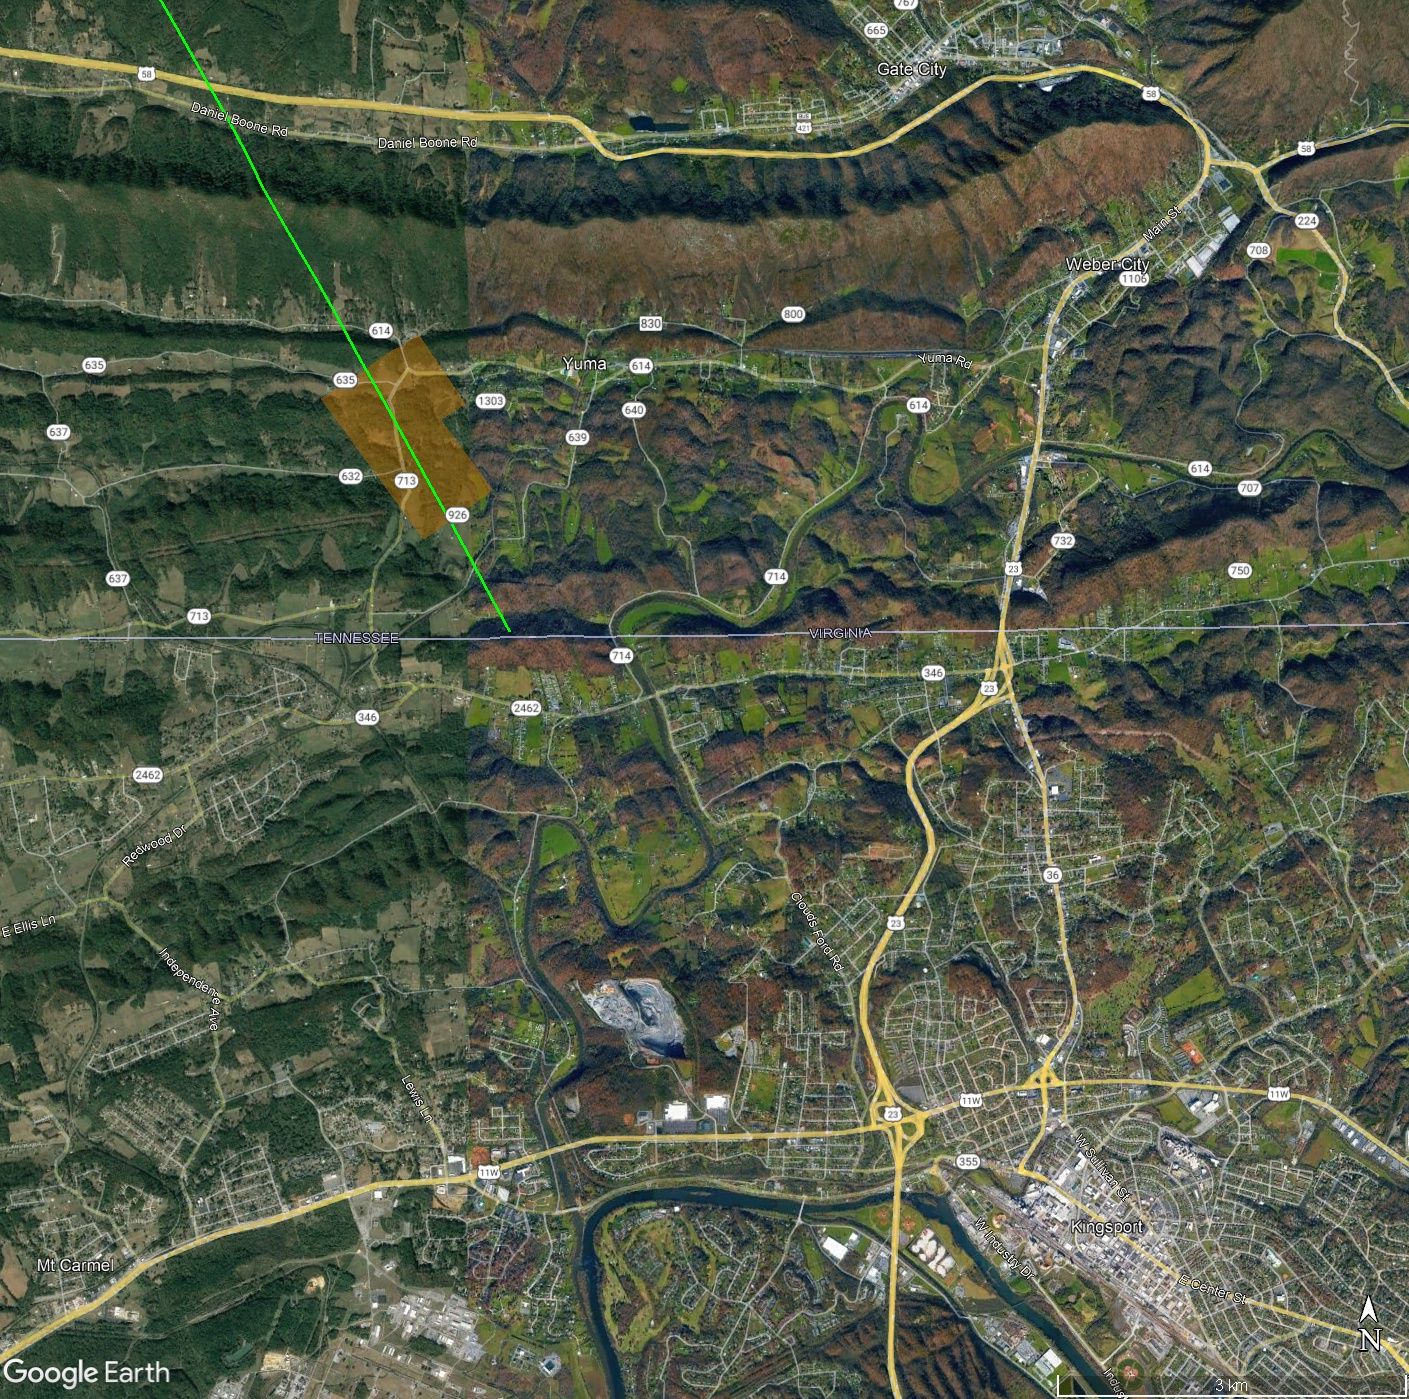 Single radar signature fall site at upper left. The green line approximates the ground track in direction only.